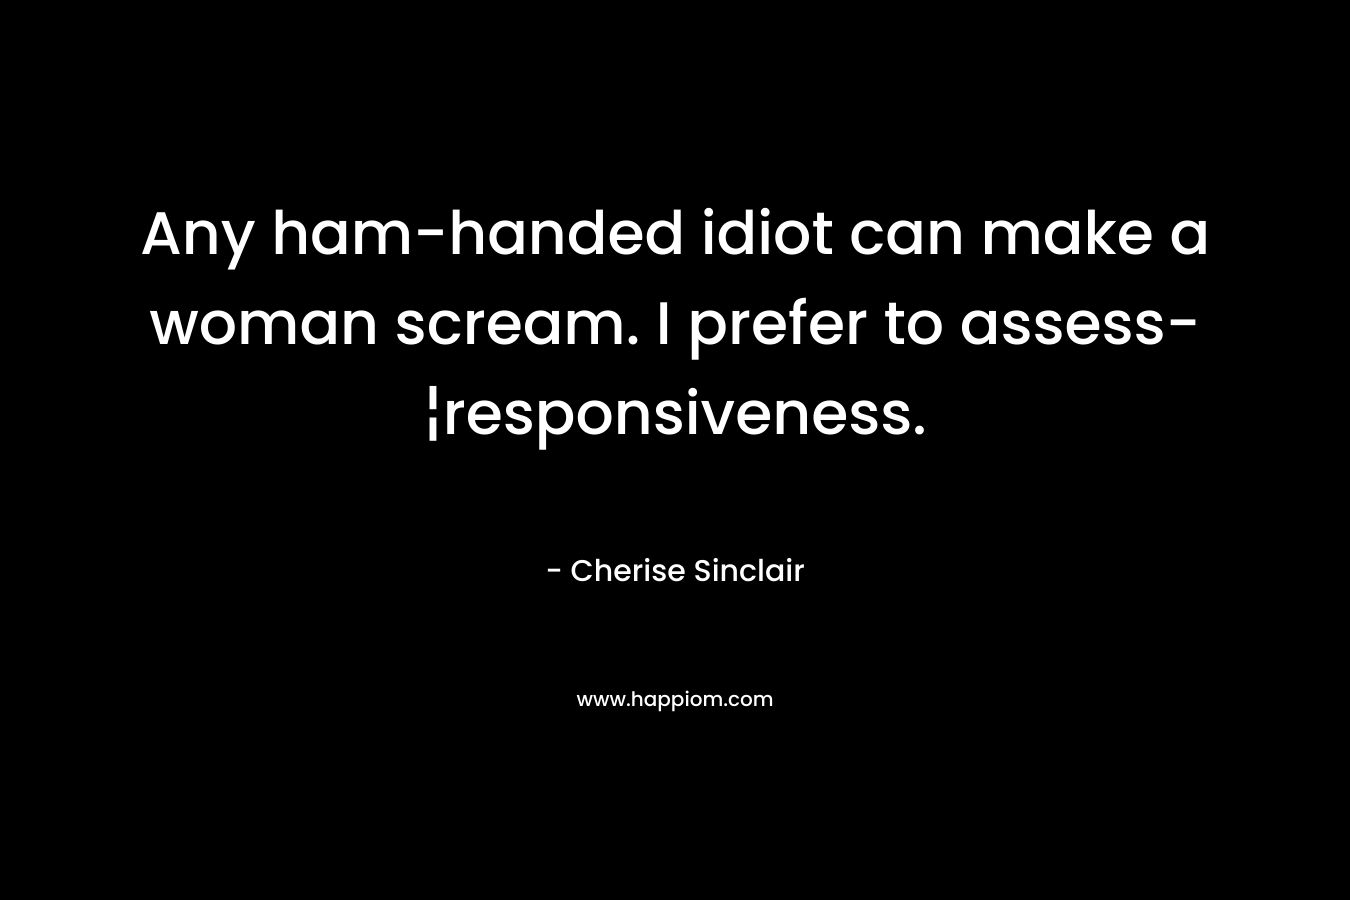 Any ham-handed idiot can make a woman scream. I prefer to assess-¦responsiveness.